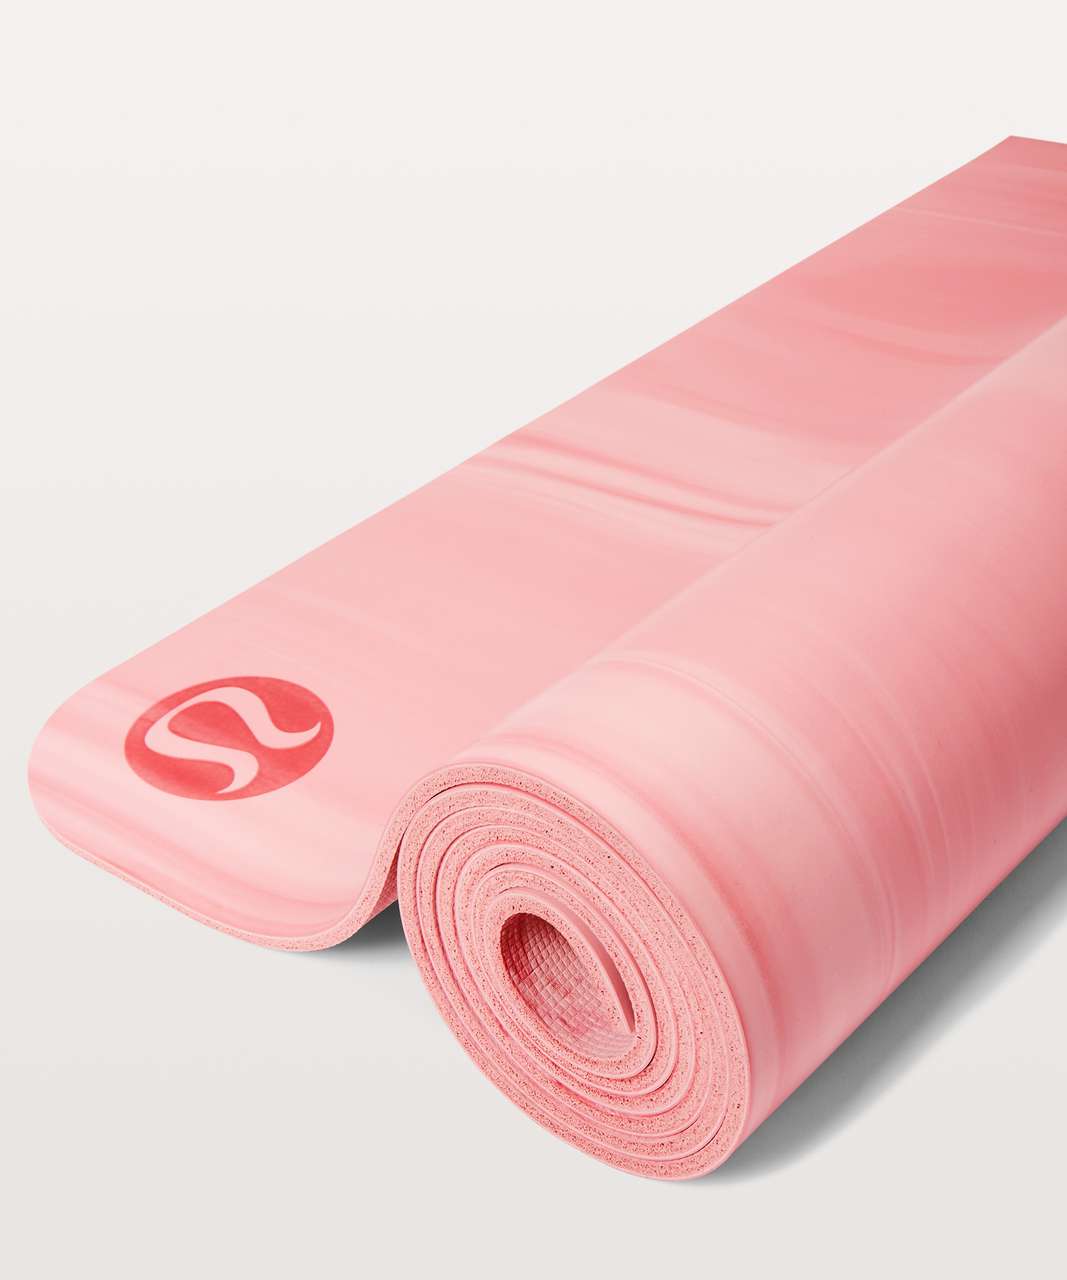 Lululemon The Reversible Mat 5mm In Pink